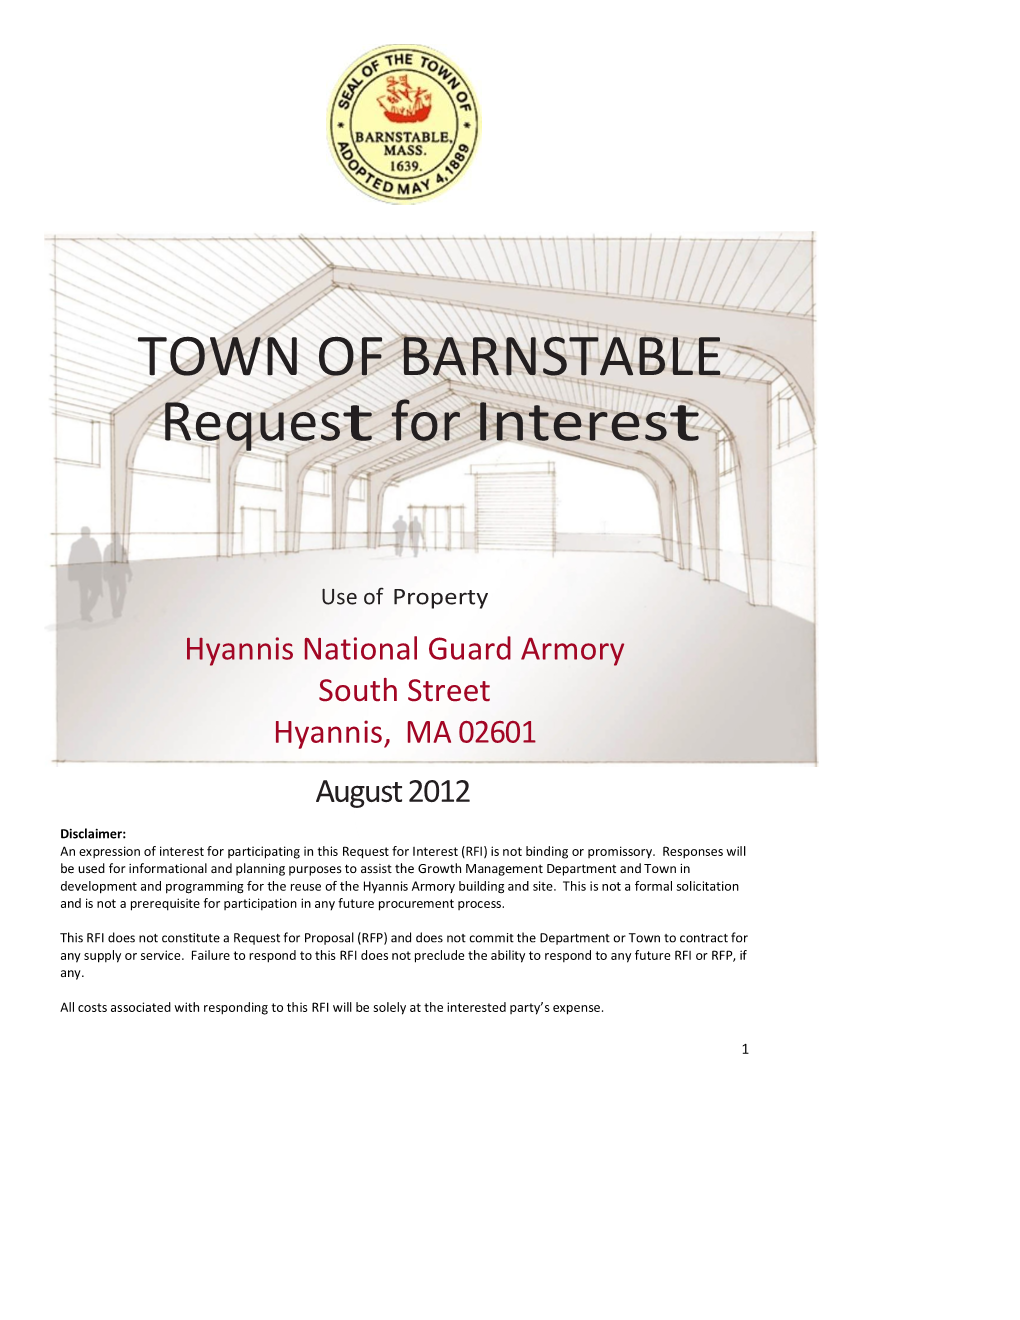 TOWN of BARNSTABLE Request for Interest